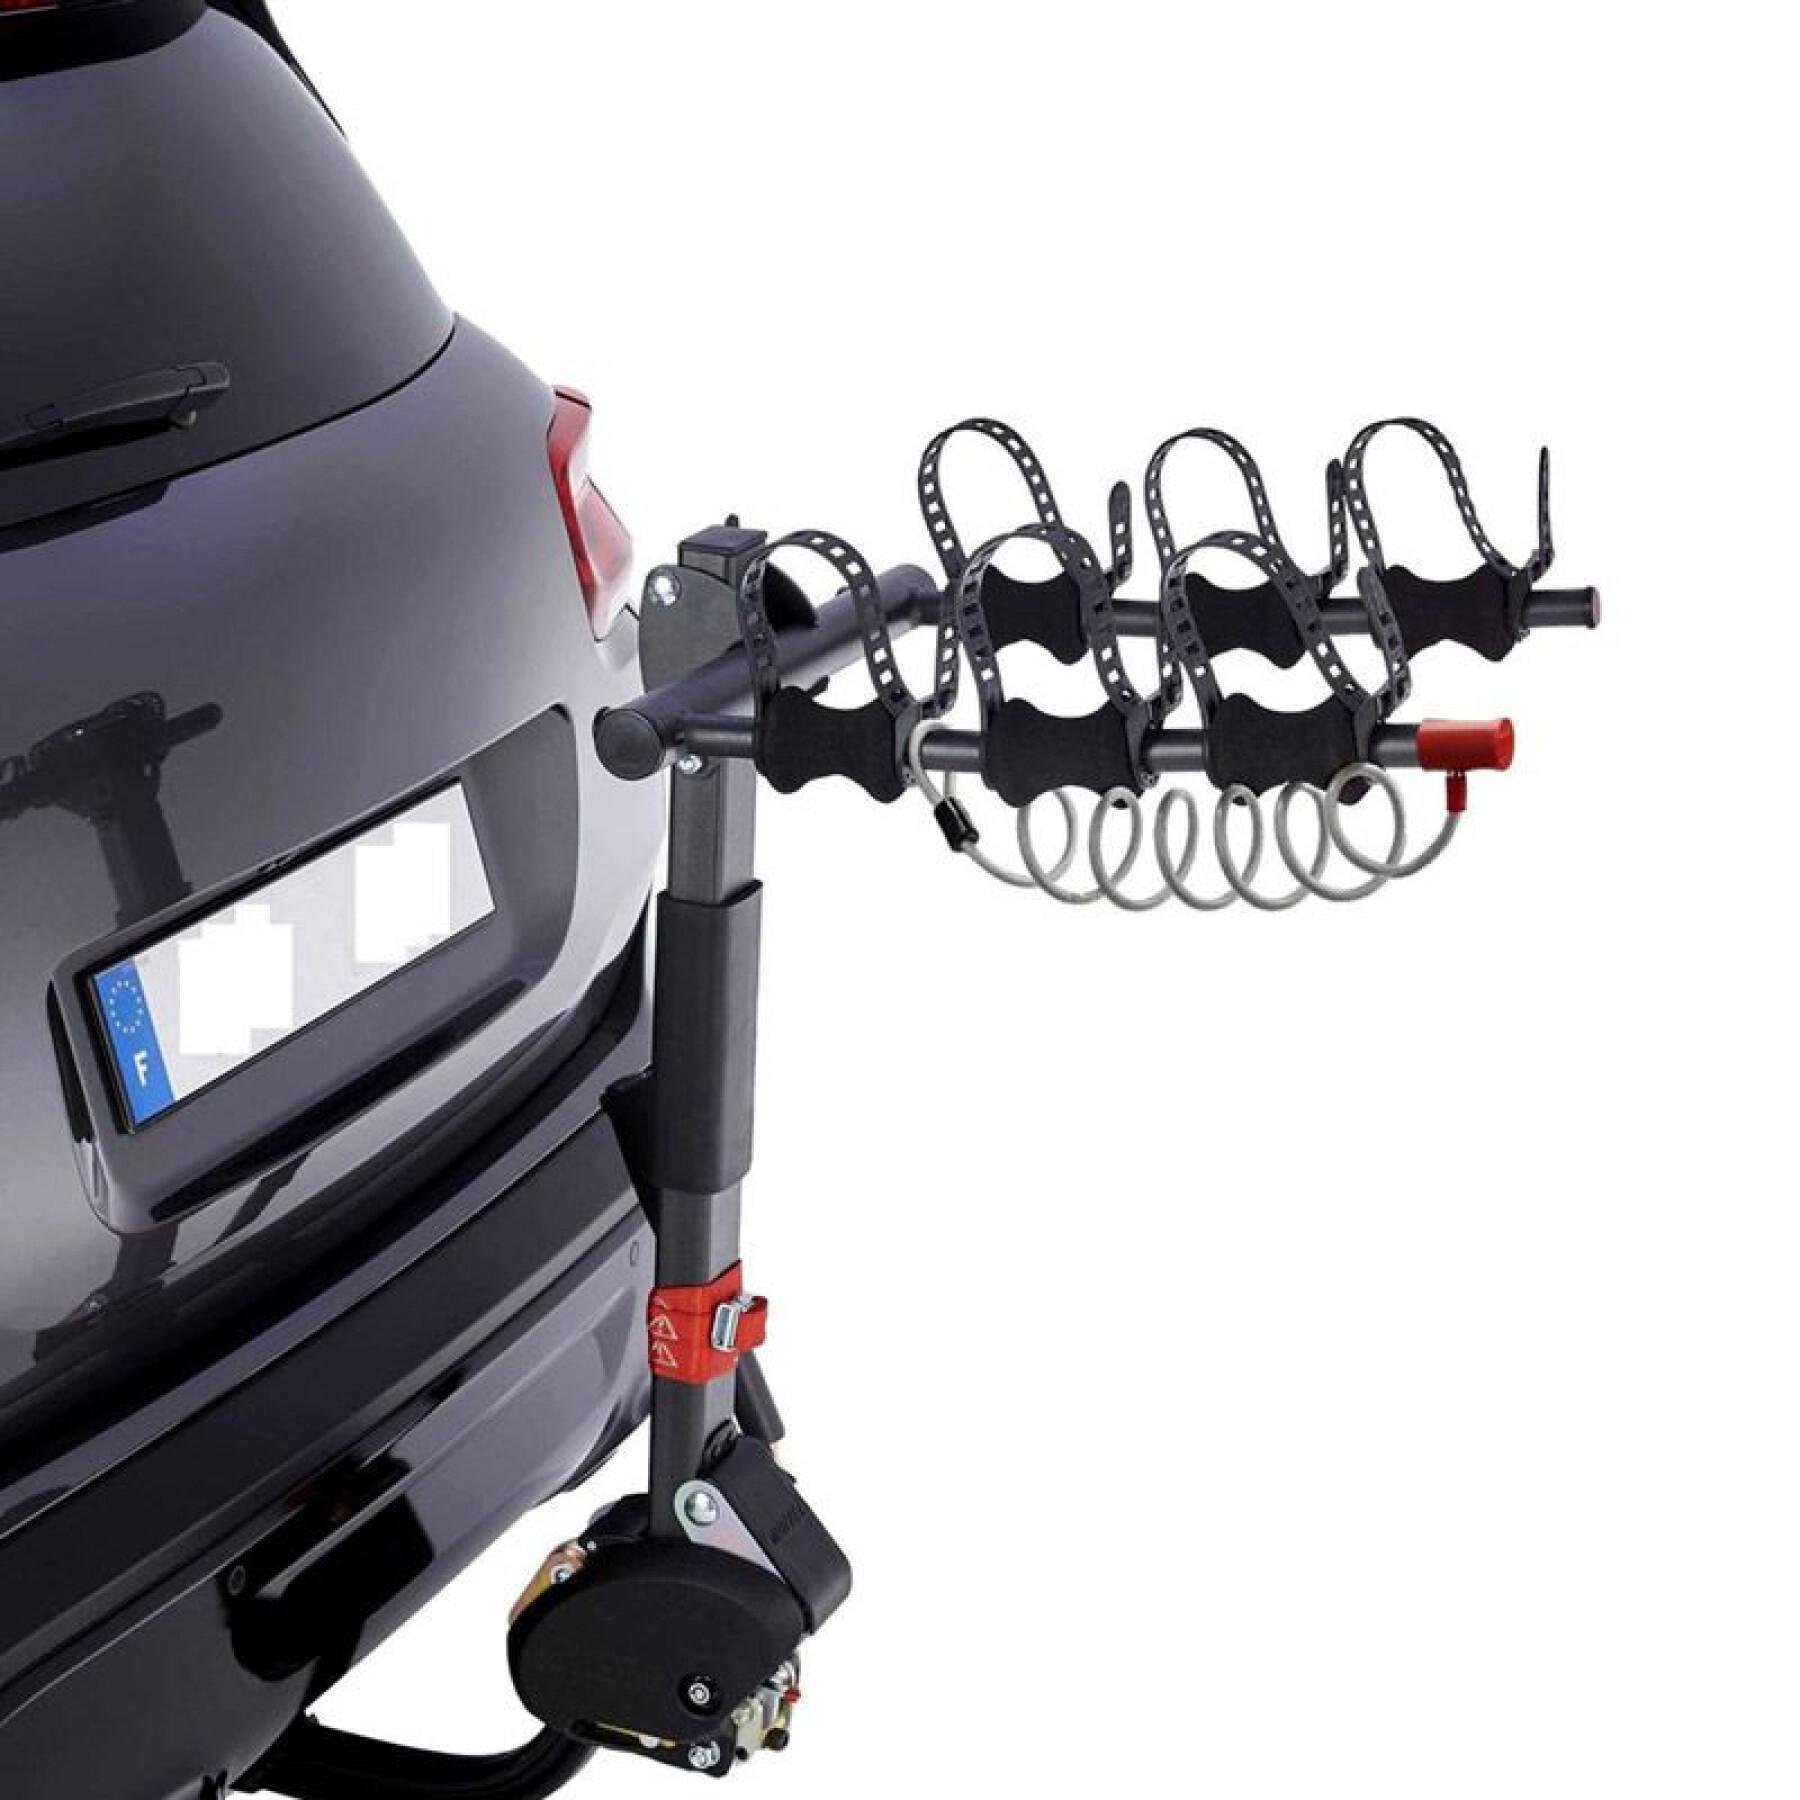 Suspended bike carrier for 3 bicycles vae- e-binclinable with anti-theft device, easy system for mounting rapide - french manufacturing Mottez Hercule homologue ce - 60 kgs